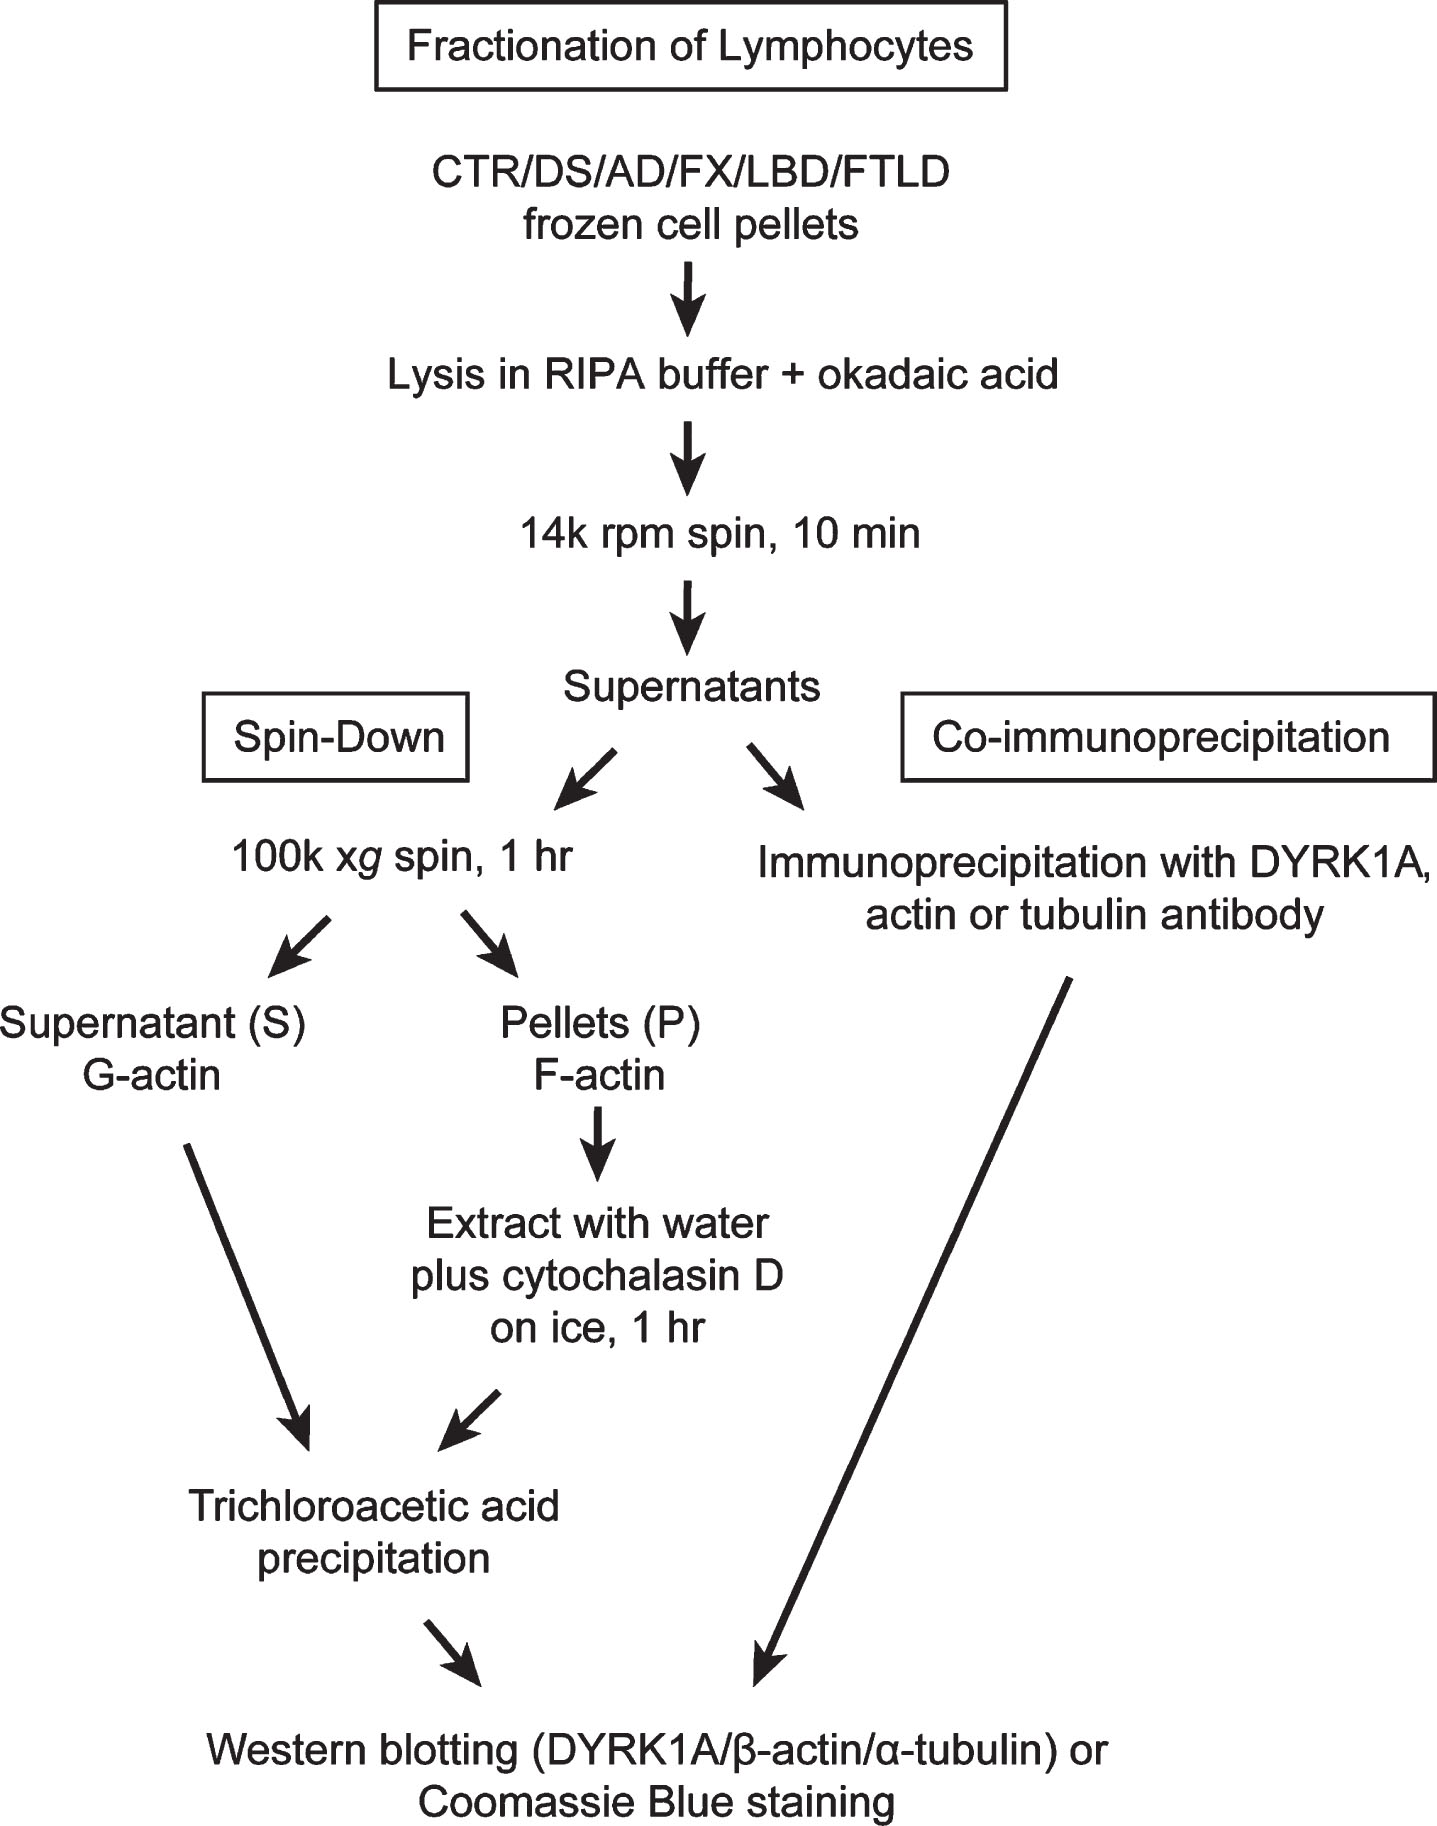 Fractionation of lymphocytes: Flow chart depicting steps leading to obtaining G- and F-actin enriched fractions and samples for immunoprecipitation.